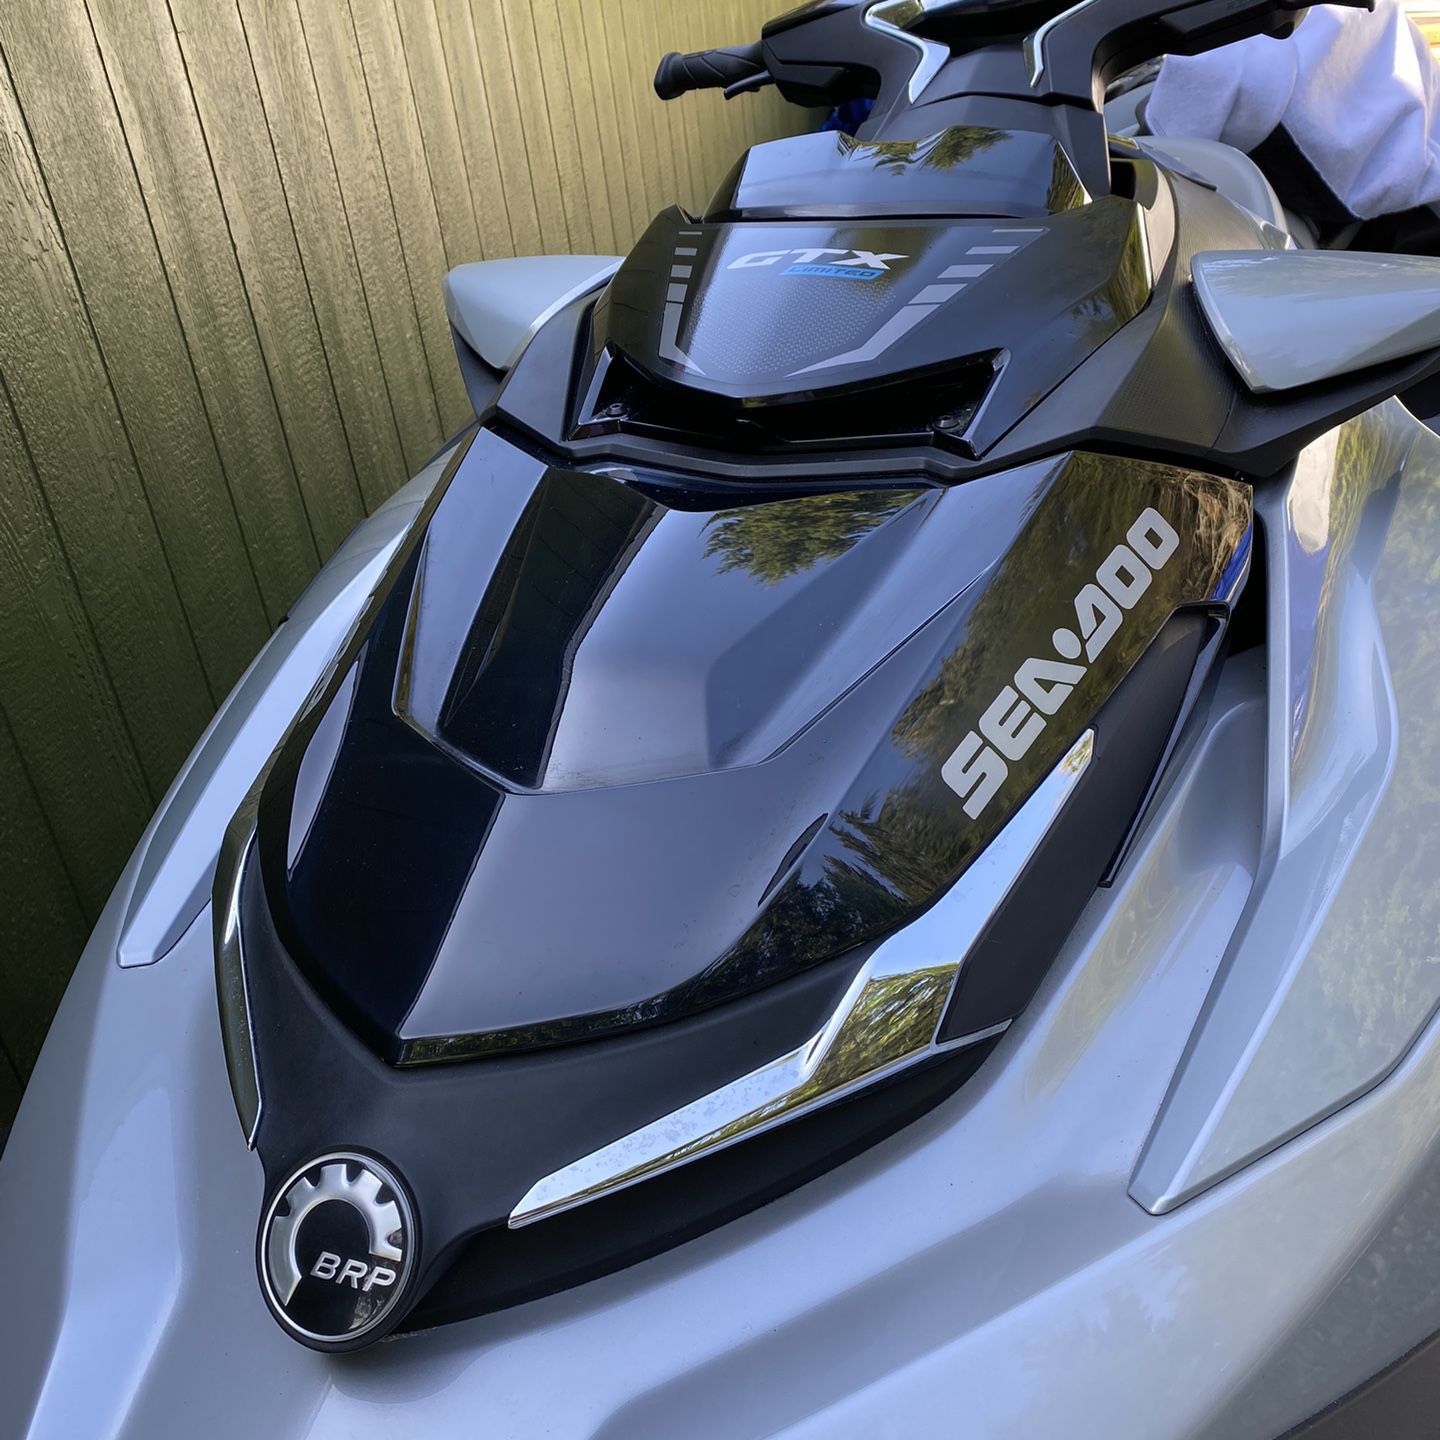 2020 Sea-doo GTX LTD 230 - Only 13 HRS - Dual Battery - all serivices kept up, its as new as preowned gets - PRICE REDUCED AND FIRM